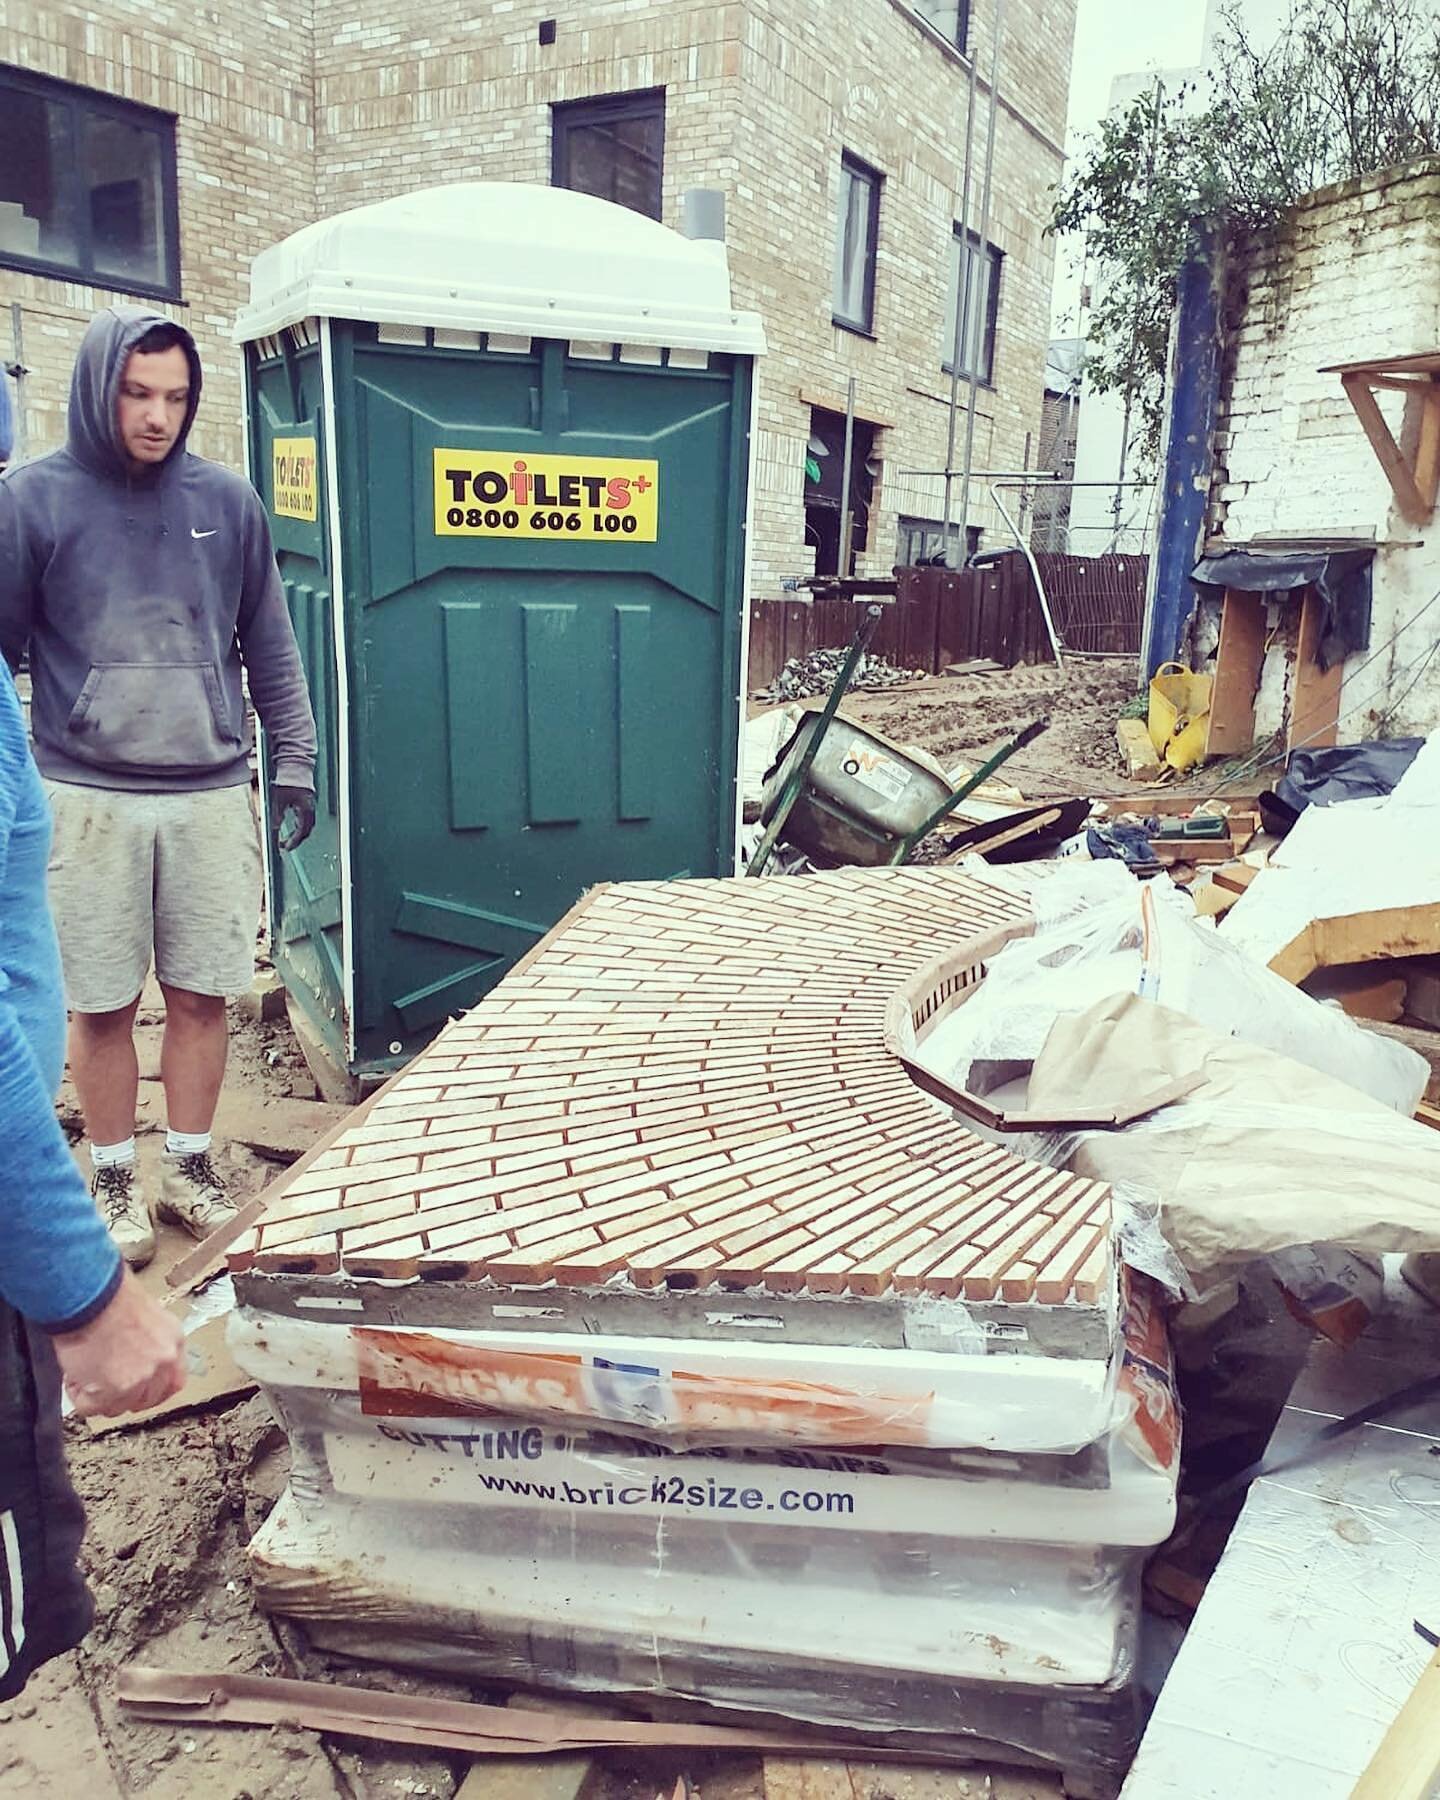 In they go, the arches! 

We&rsquo;re installing these pre-made brick sunrise arches to each of the entrances at our Alma Place development. Looking good! 

_______________________________

#almaplaceproject #almaplace #tdostudio #crystalpalace #crys